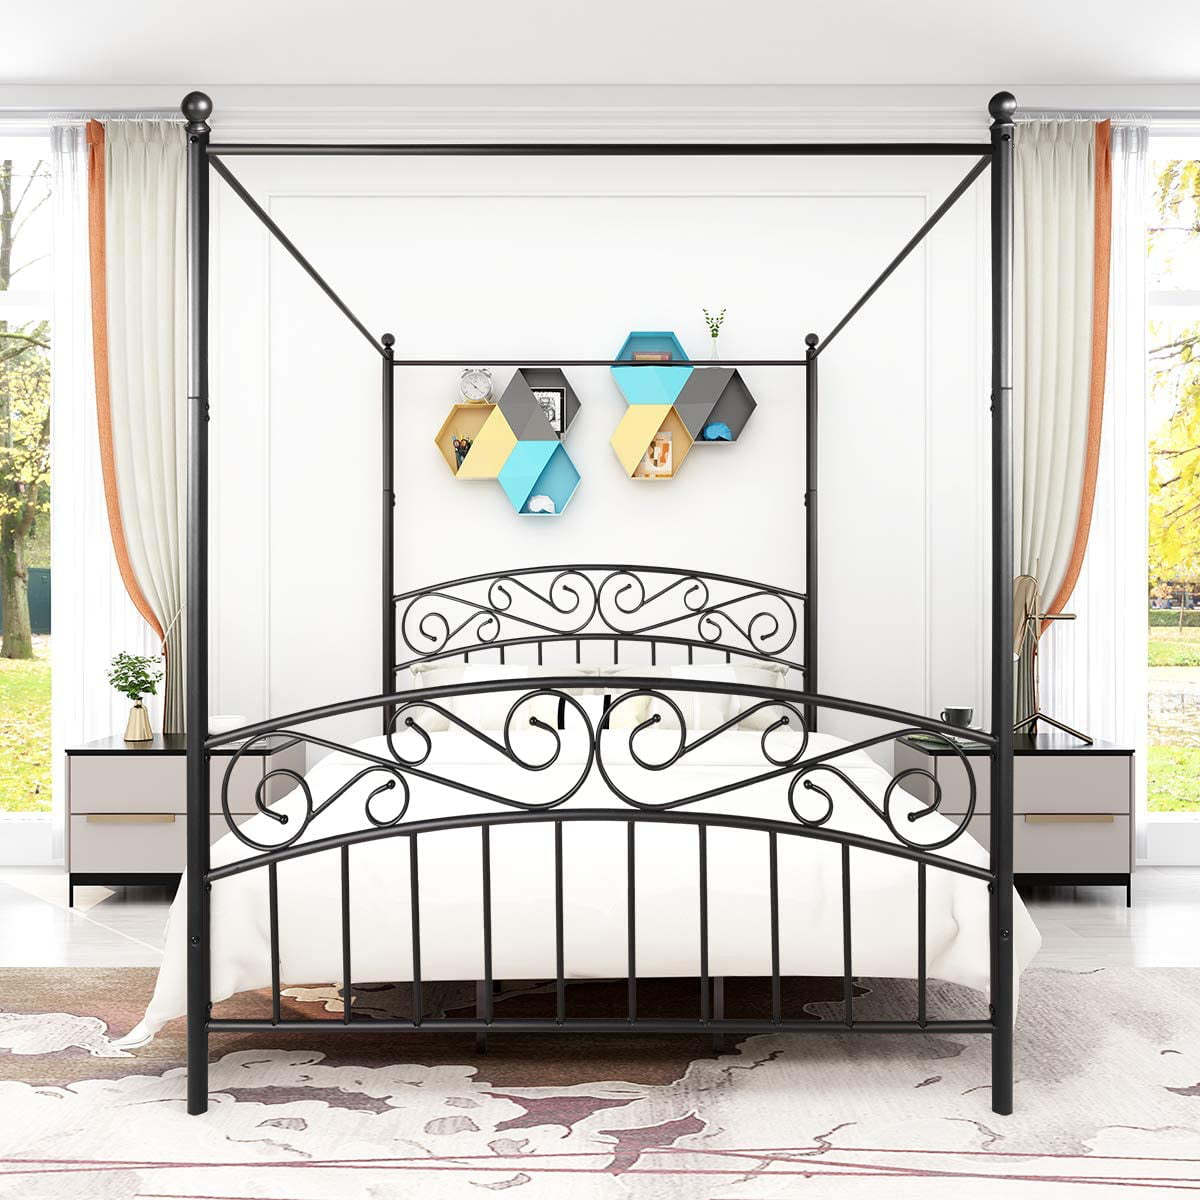 correct kern bloed Black Canopy Bed Frame, Queen Size Metal Bed with Headboard&Footboard,  Platform Queen Bed No Box Spring Needed, Metal Canopy Bed with 4-post,  Queen Platform Bed for Kids Adults, Queen, A4593 - Walmart.com